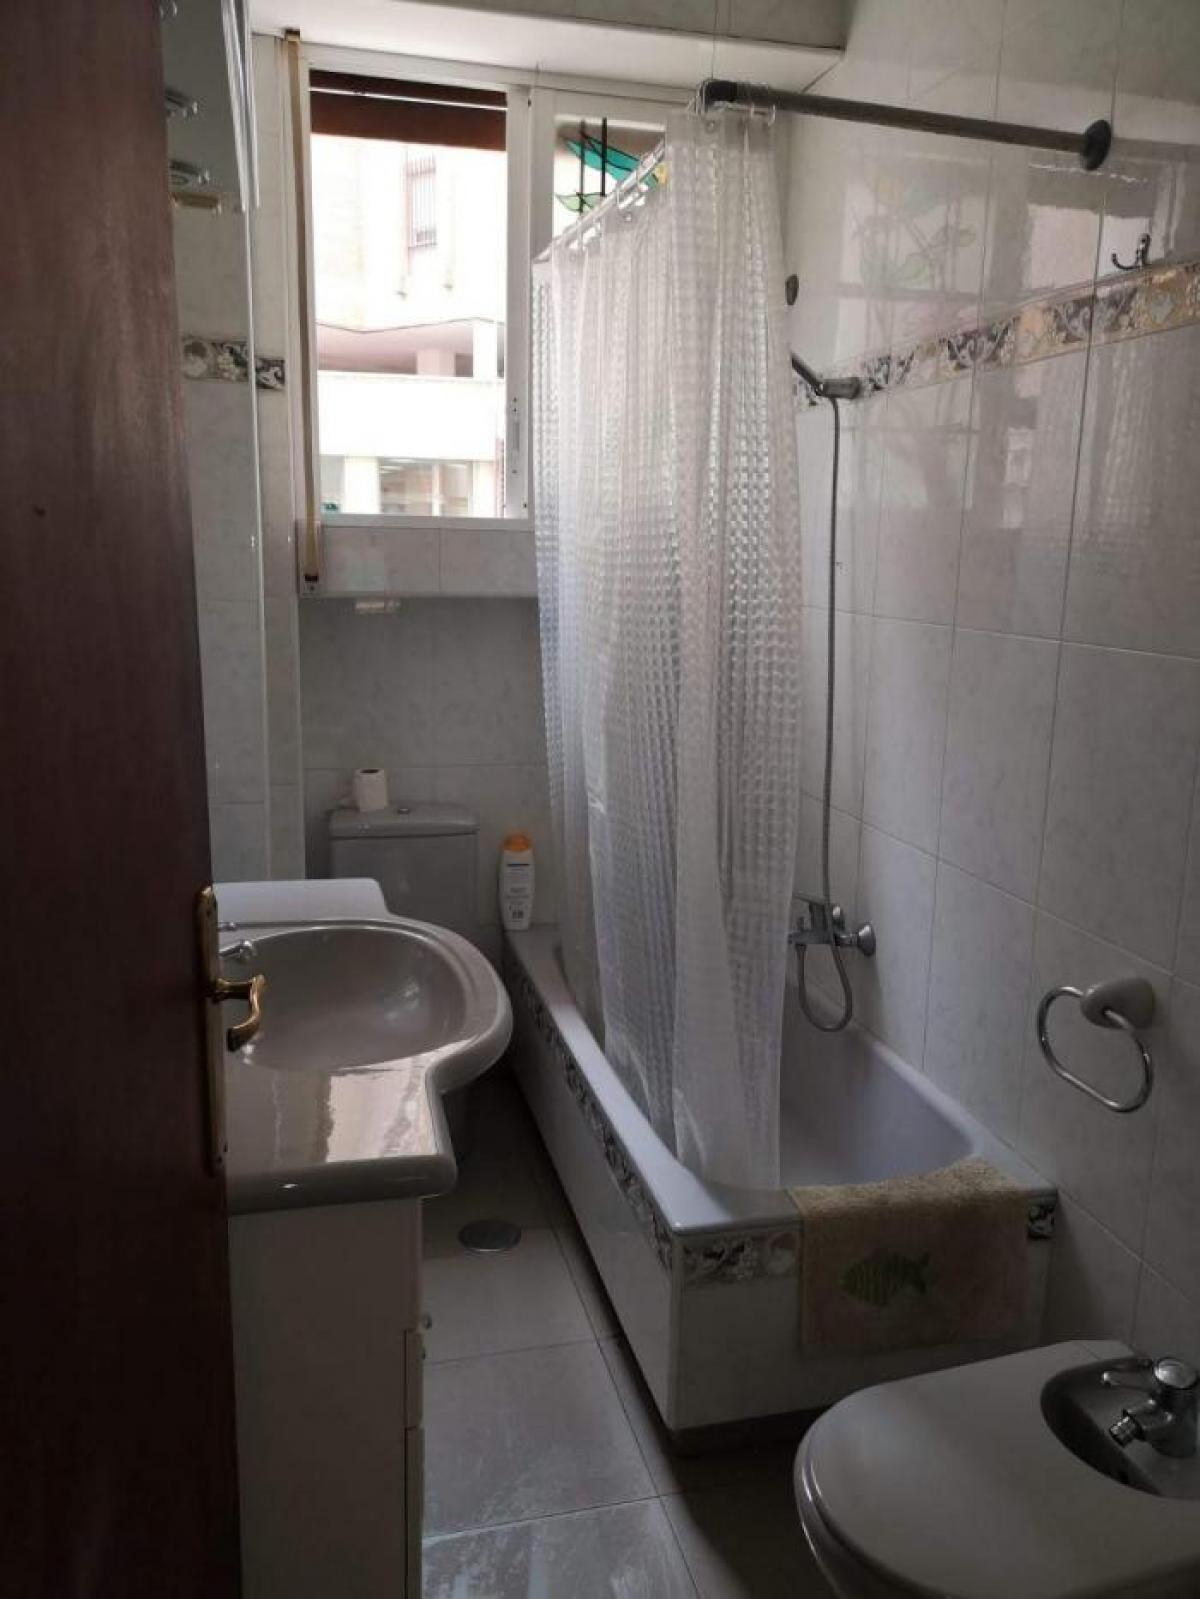 Picture of Apartment For Rent in Murcia, Murcia, Spain